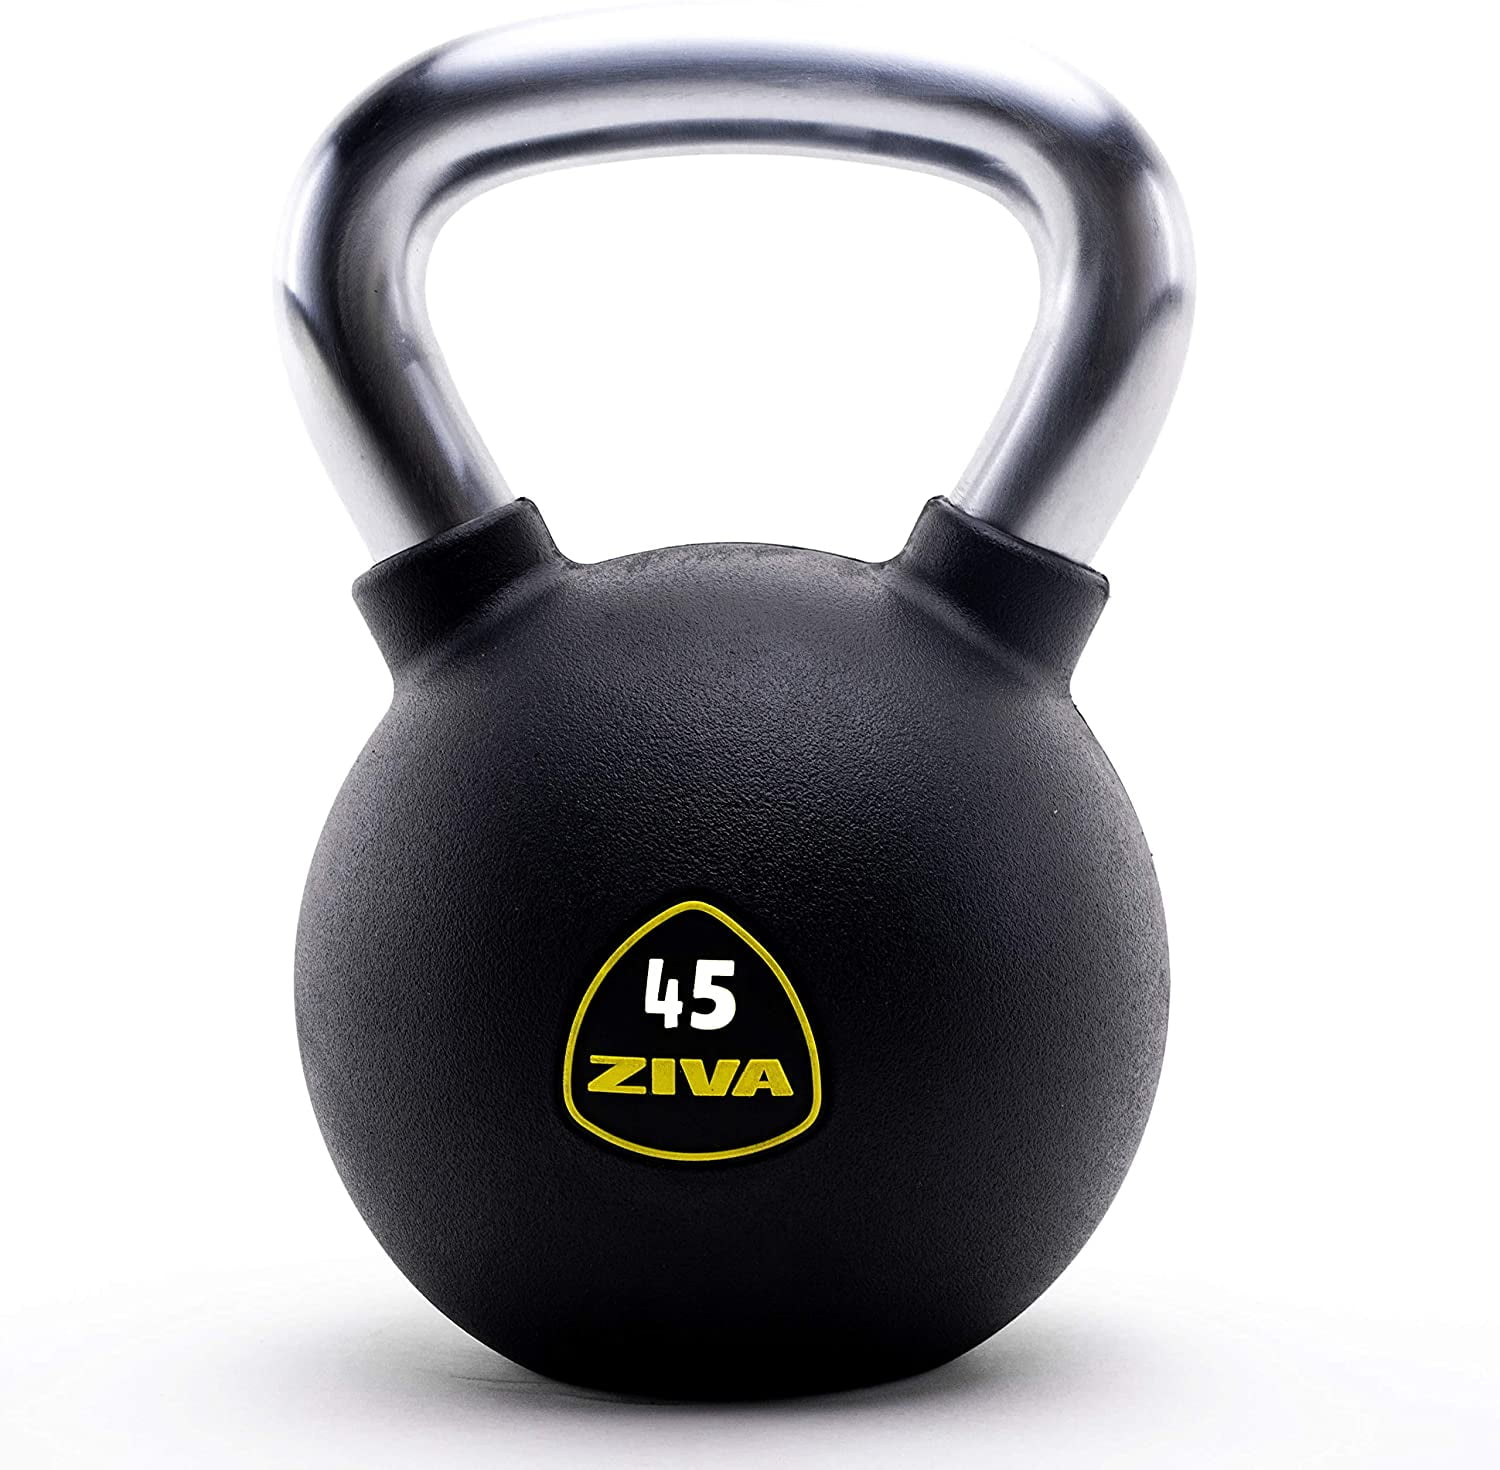 ZIVA Premium Virgin Rubber Solid Cast Steel Kettlebell Weight Core and Strength Training Exercise Workout Multiple Sizes 5 to 50 lbs Odorless Design Ergonomic Comfort Grip 